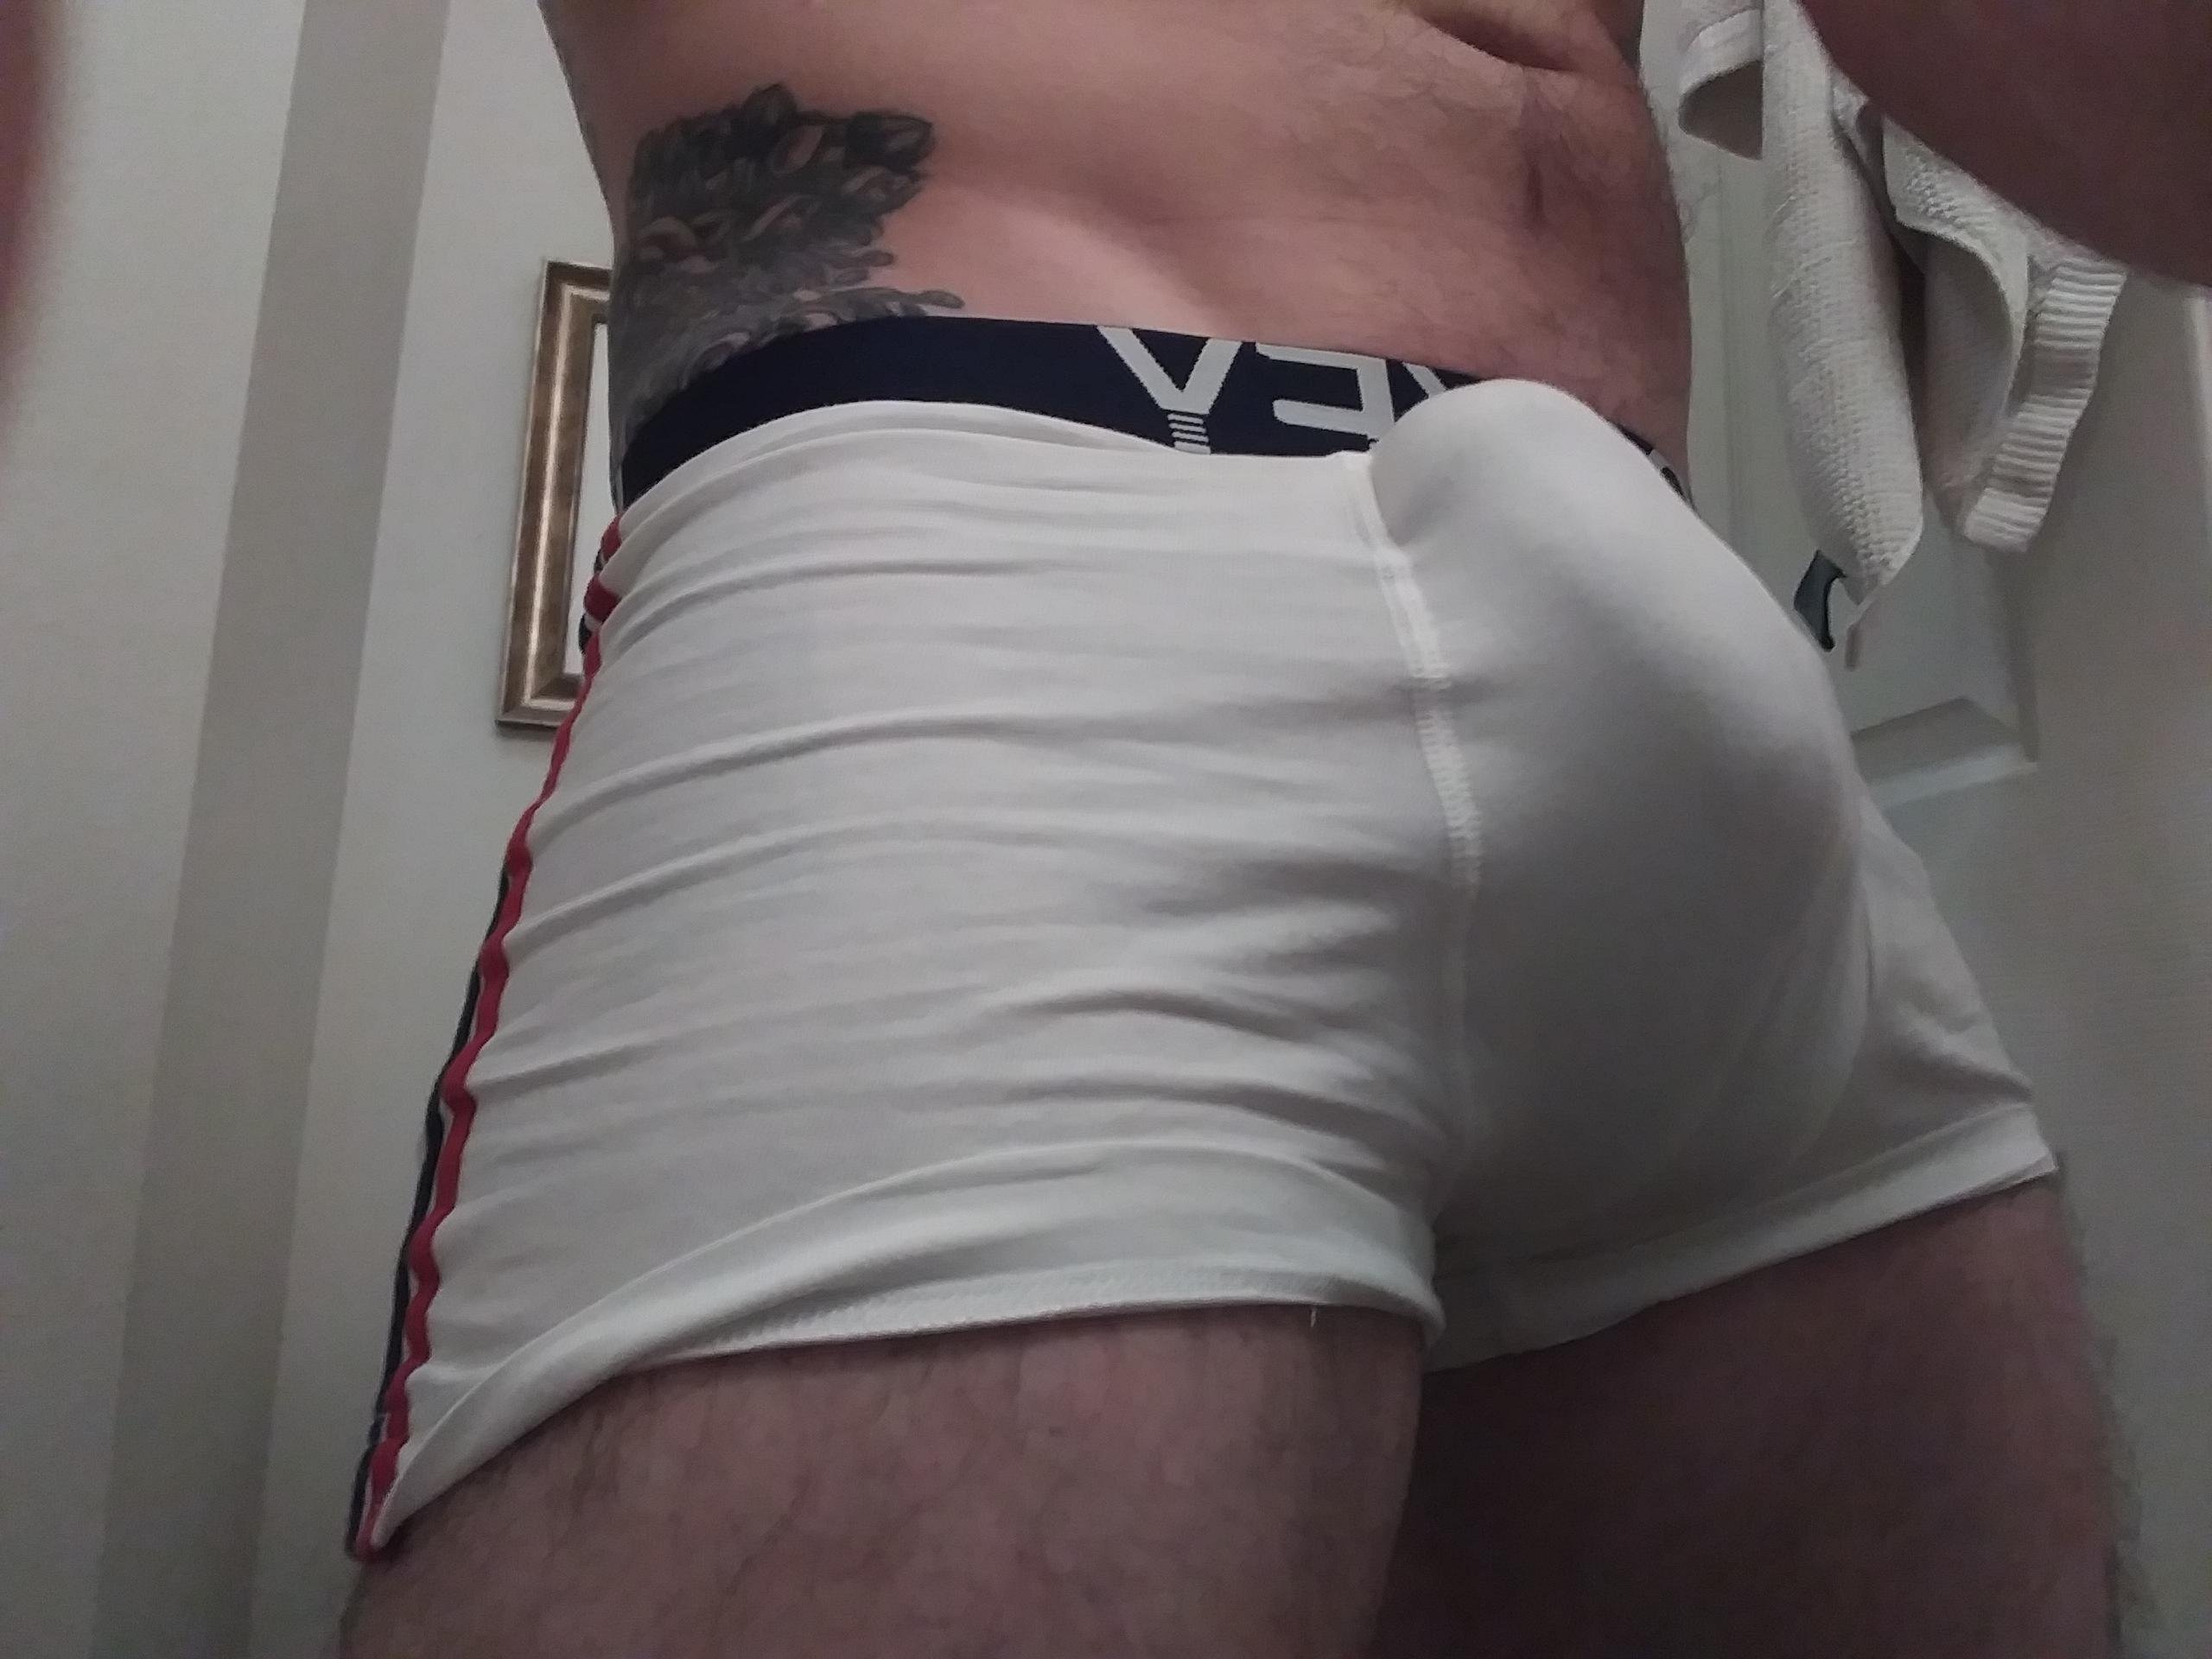 New underwear. They feel a little tight.